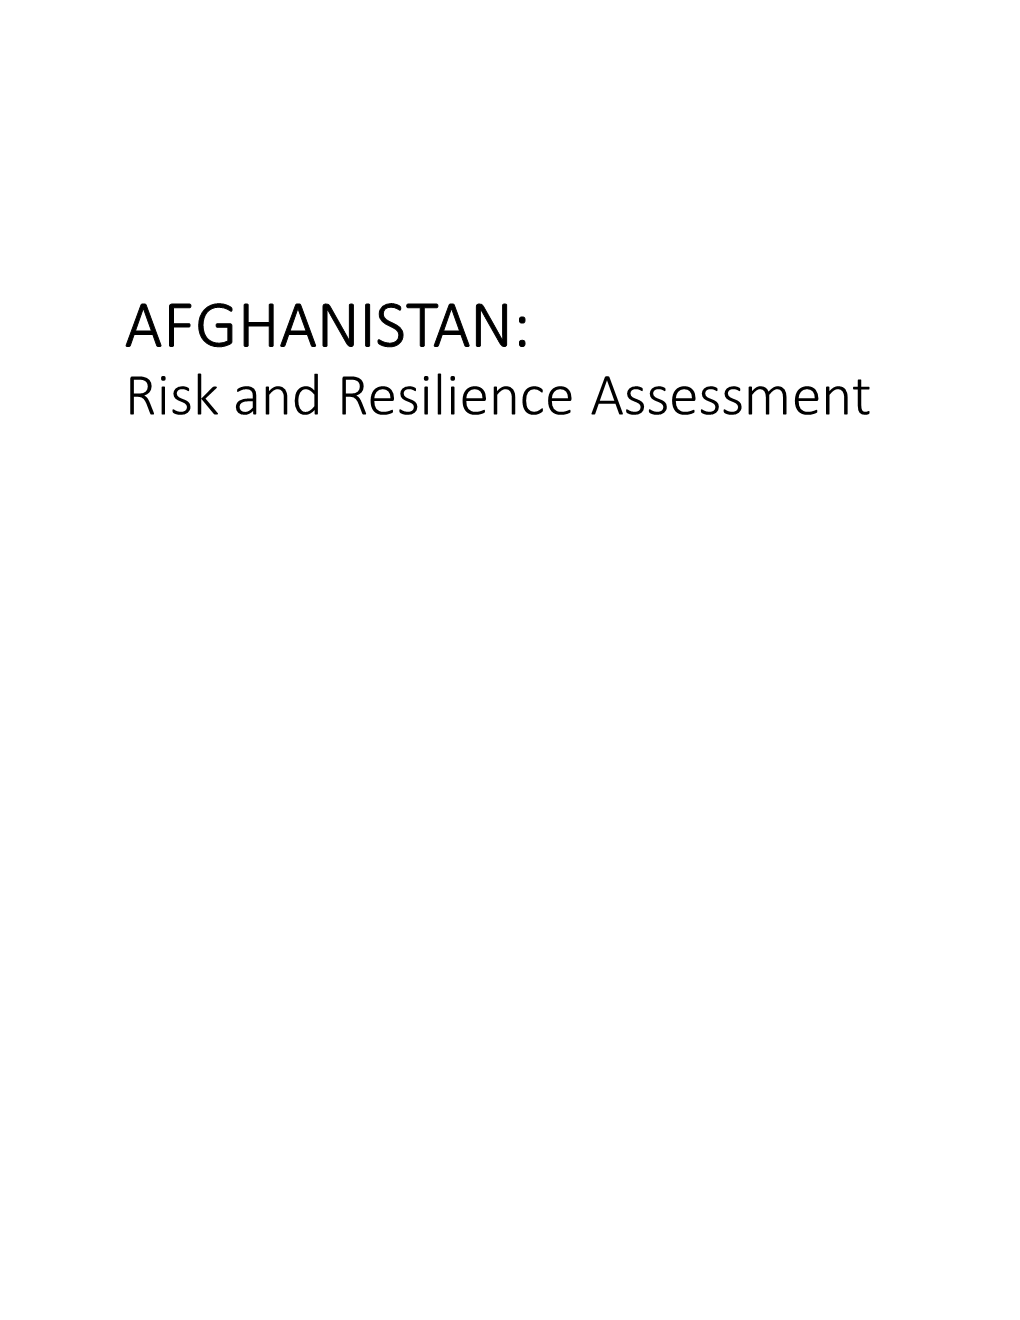 Afghanistan Risk and Resilience Assessment